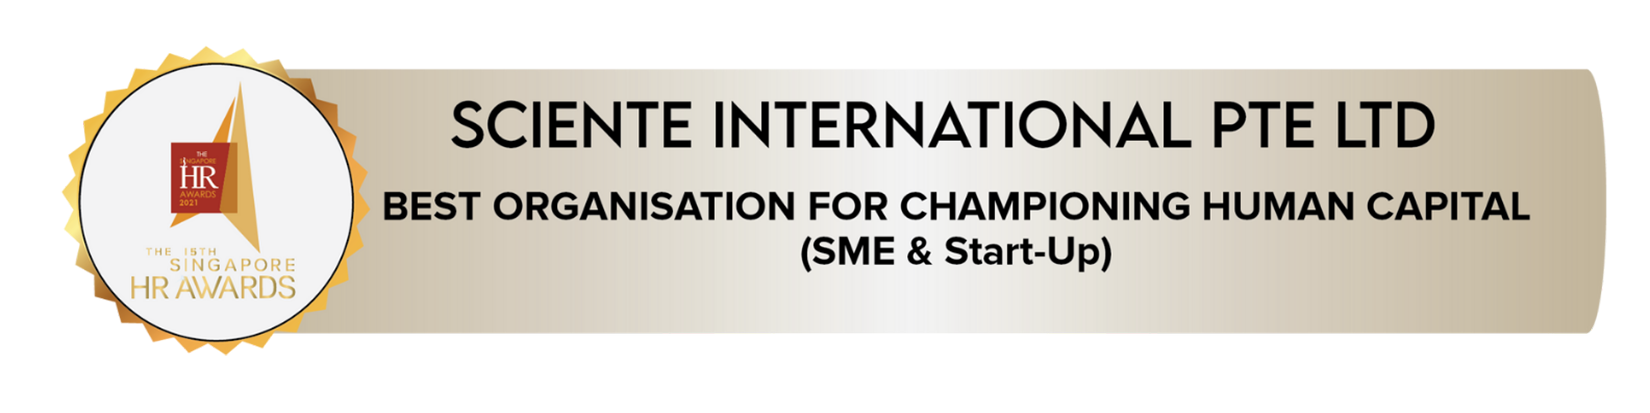 Sciente International is voted the Best Organisation for Championing Human Capital (SME & Start-Ups)